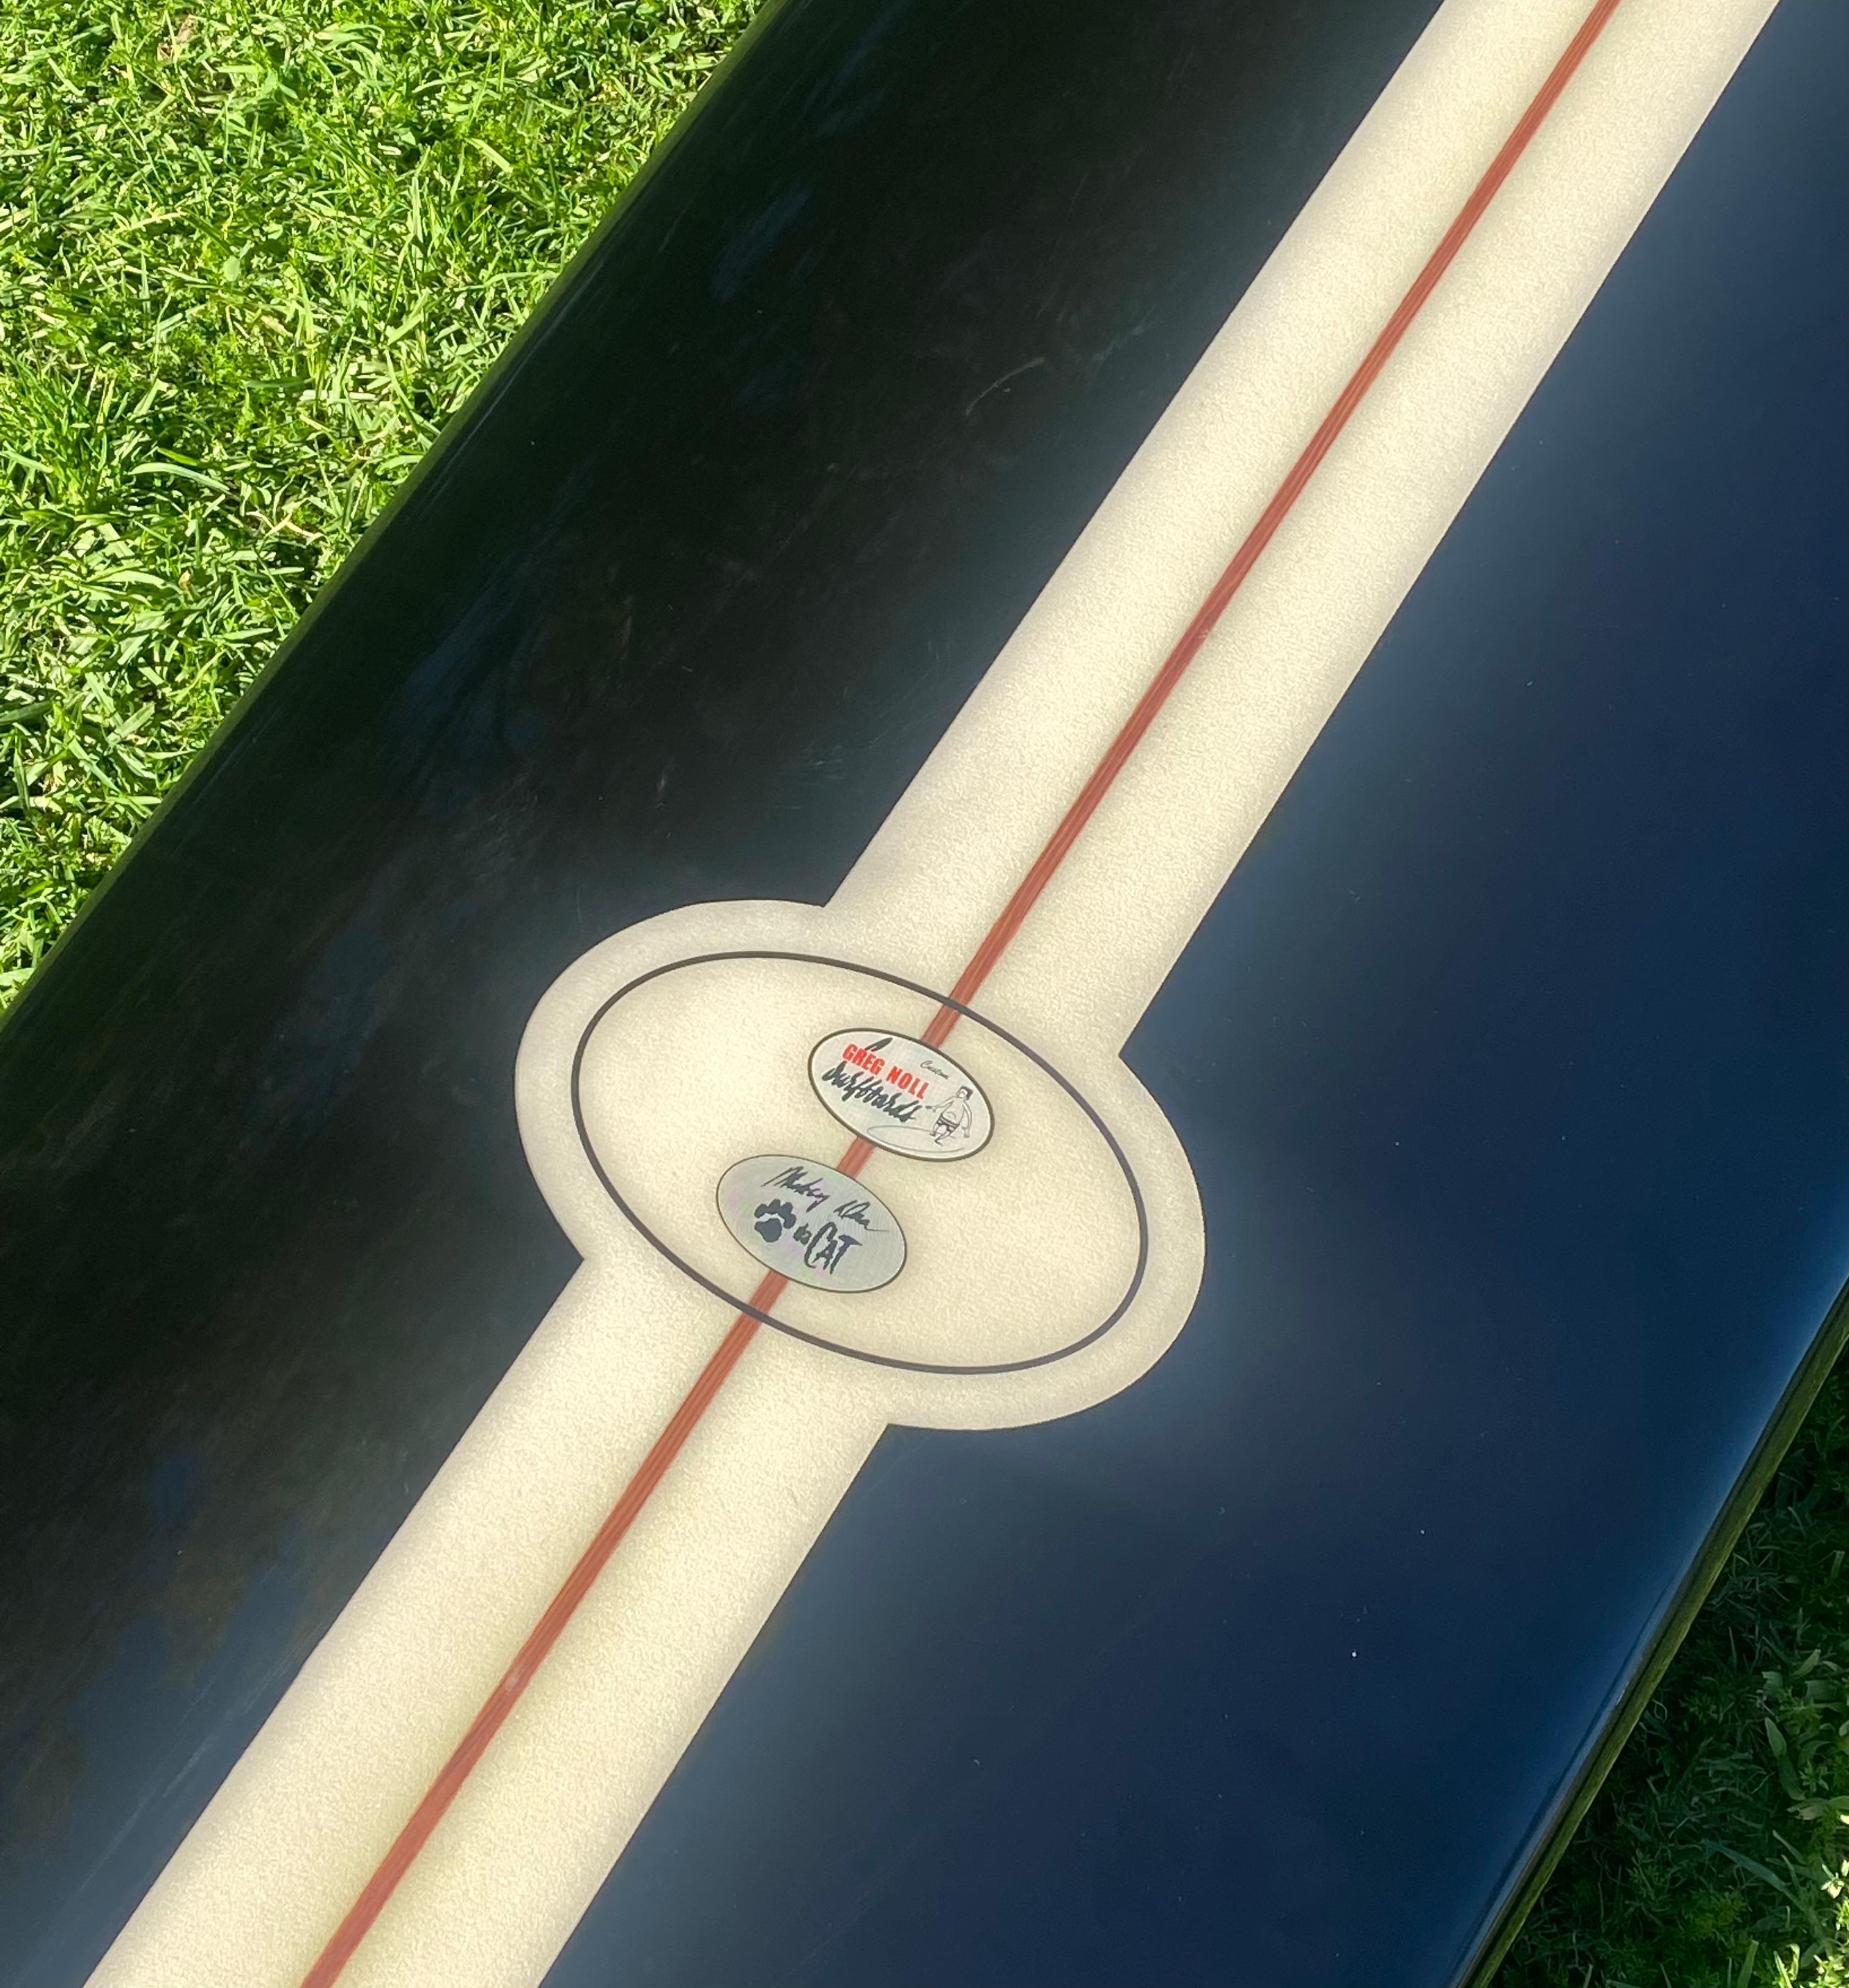 1966 Vintage Greg Noll Miki Dora Da Cat longboard. Features the most desired black pigment variation which Miki Dora was known to ride himself. A highly coveted 1st generation Greg Noll Miki Dora Da Cat, known by the pronounced step deck and